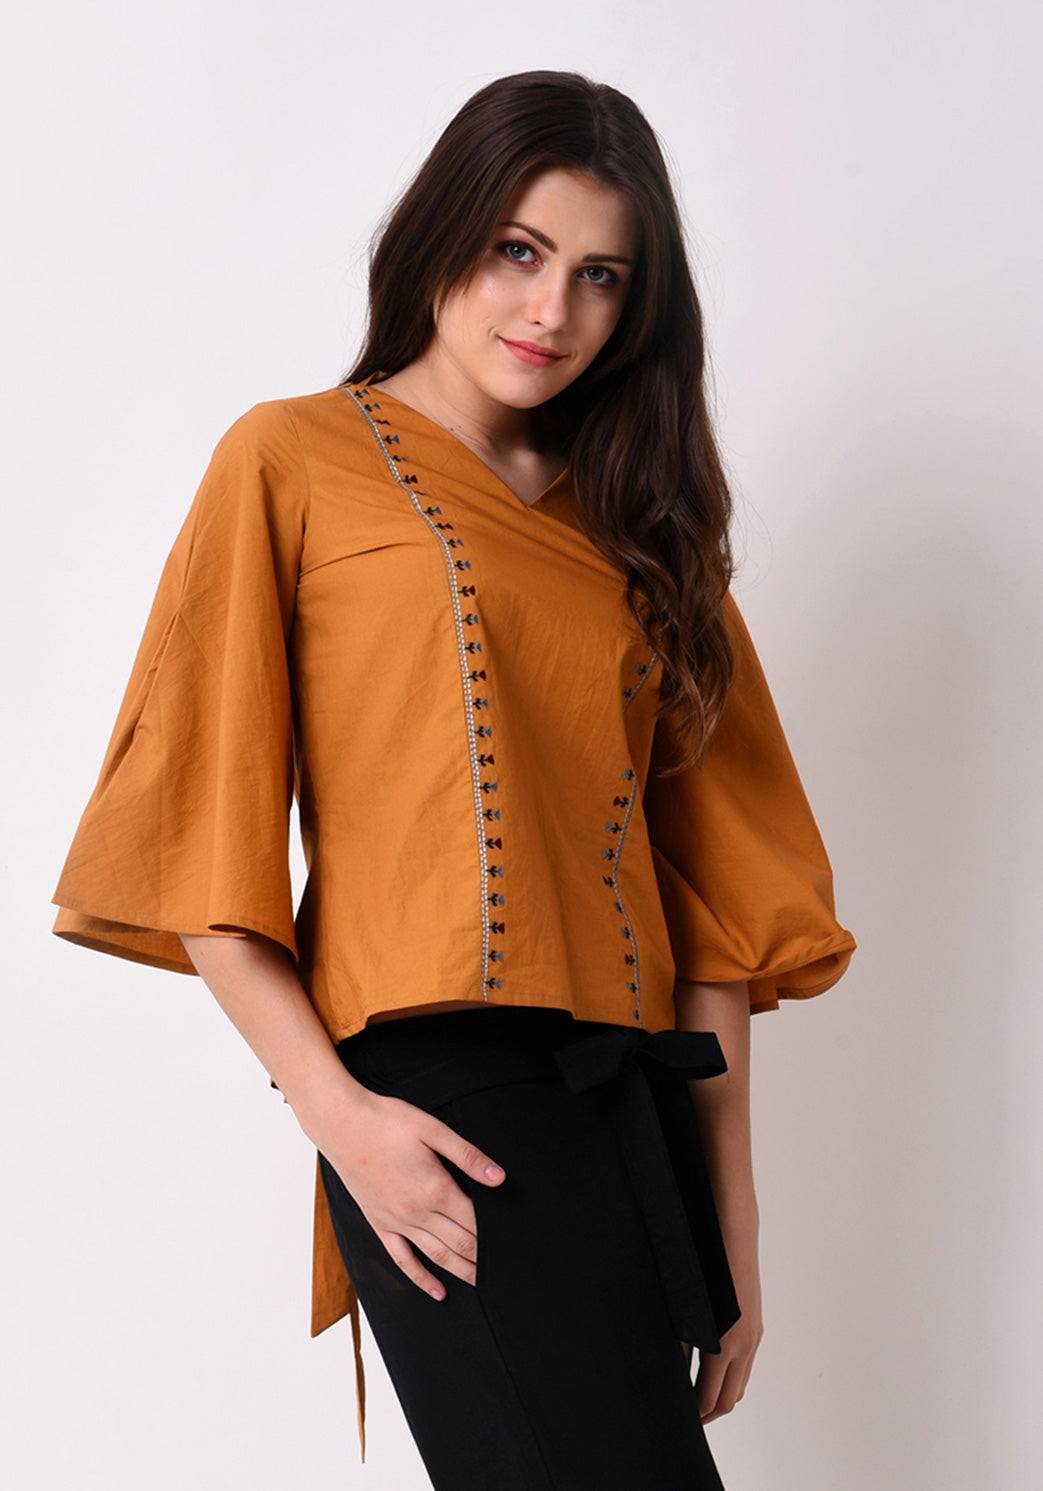 Tribal Embroidered Top - Mustard